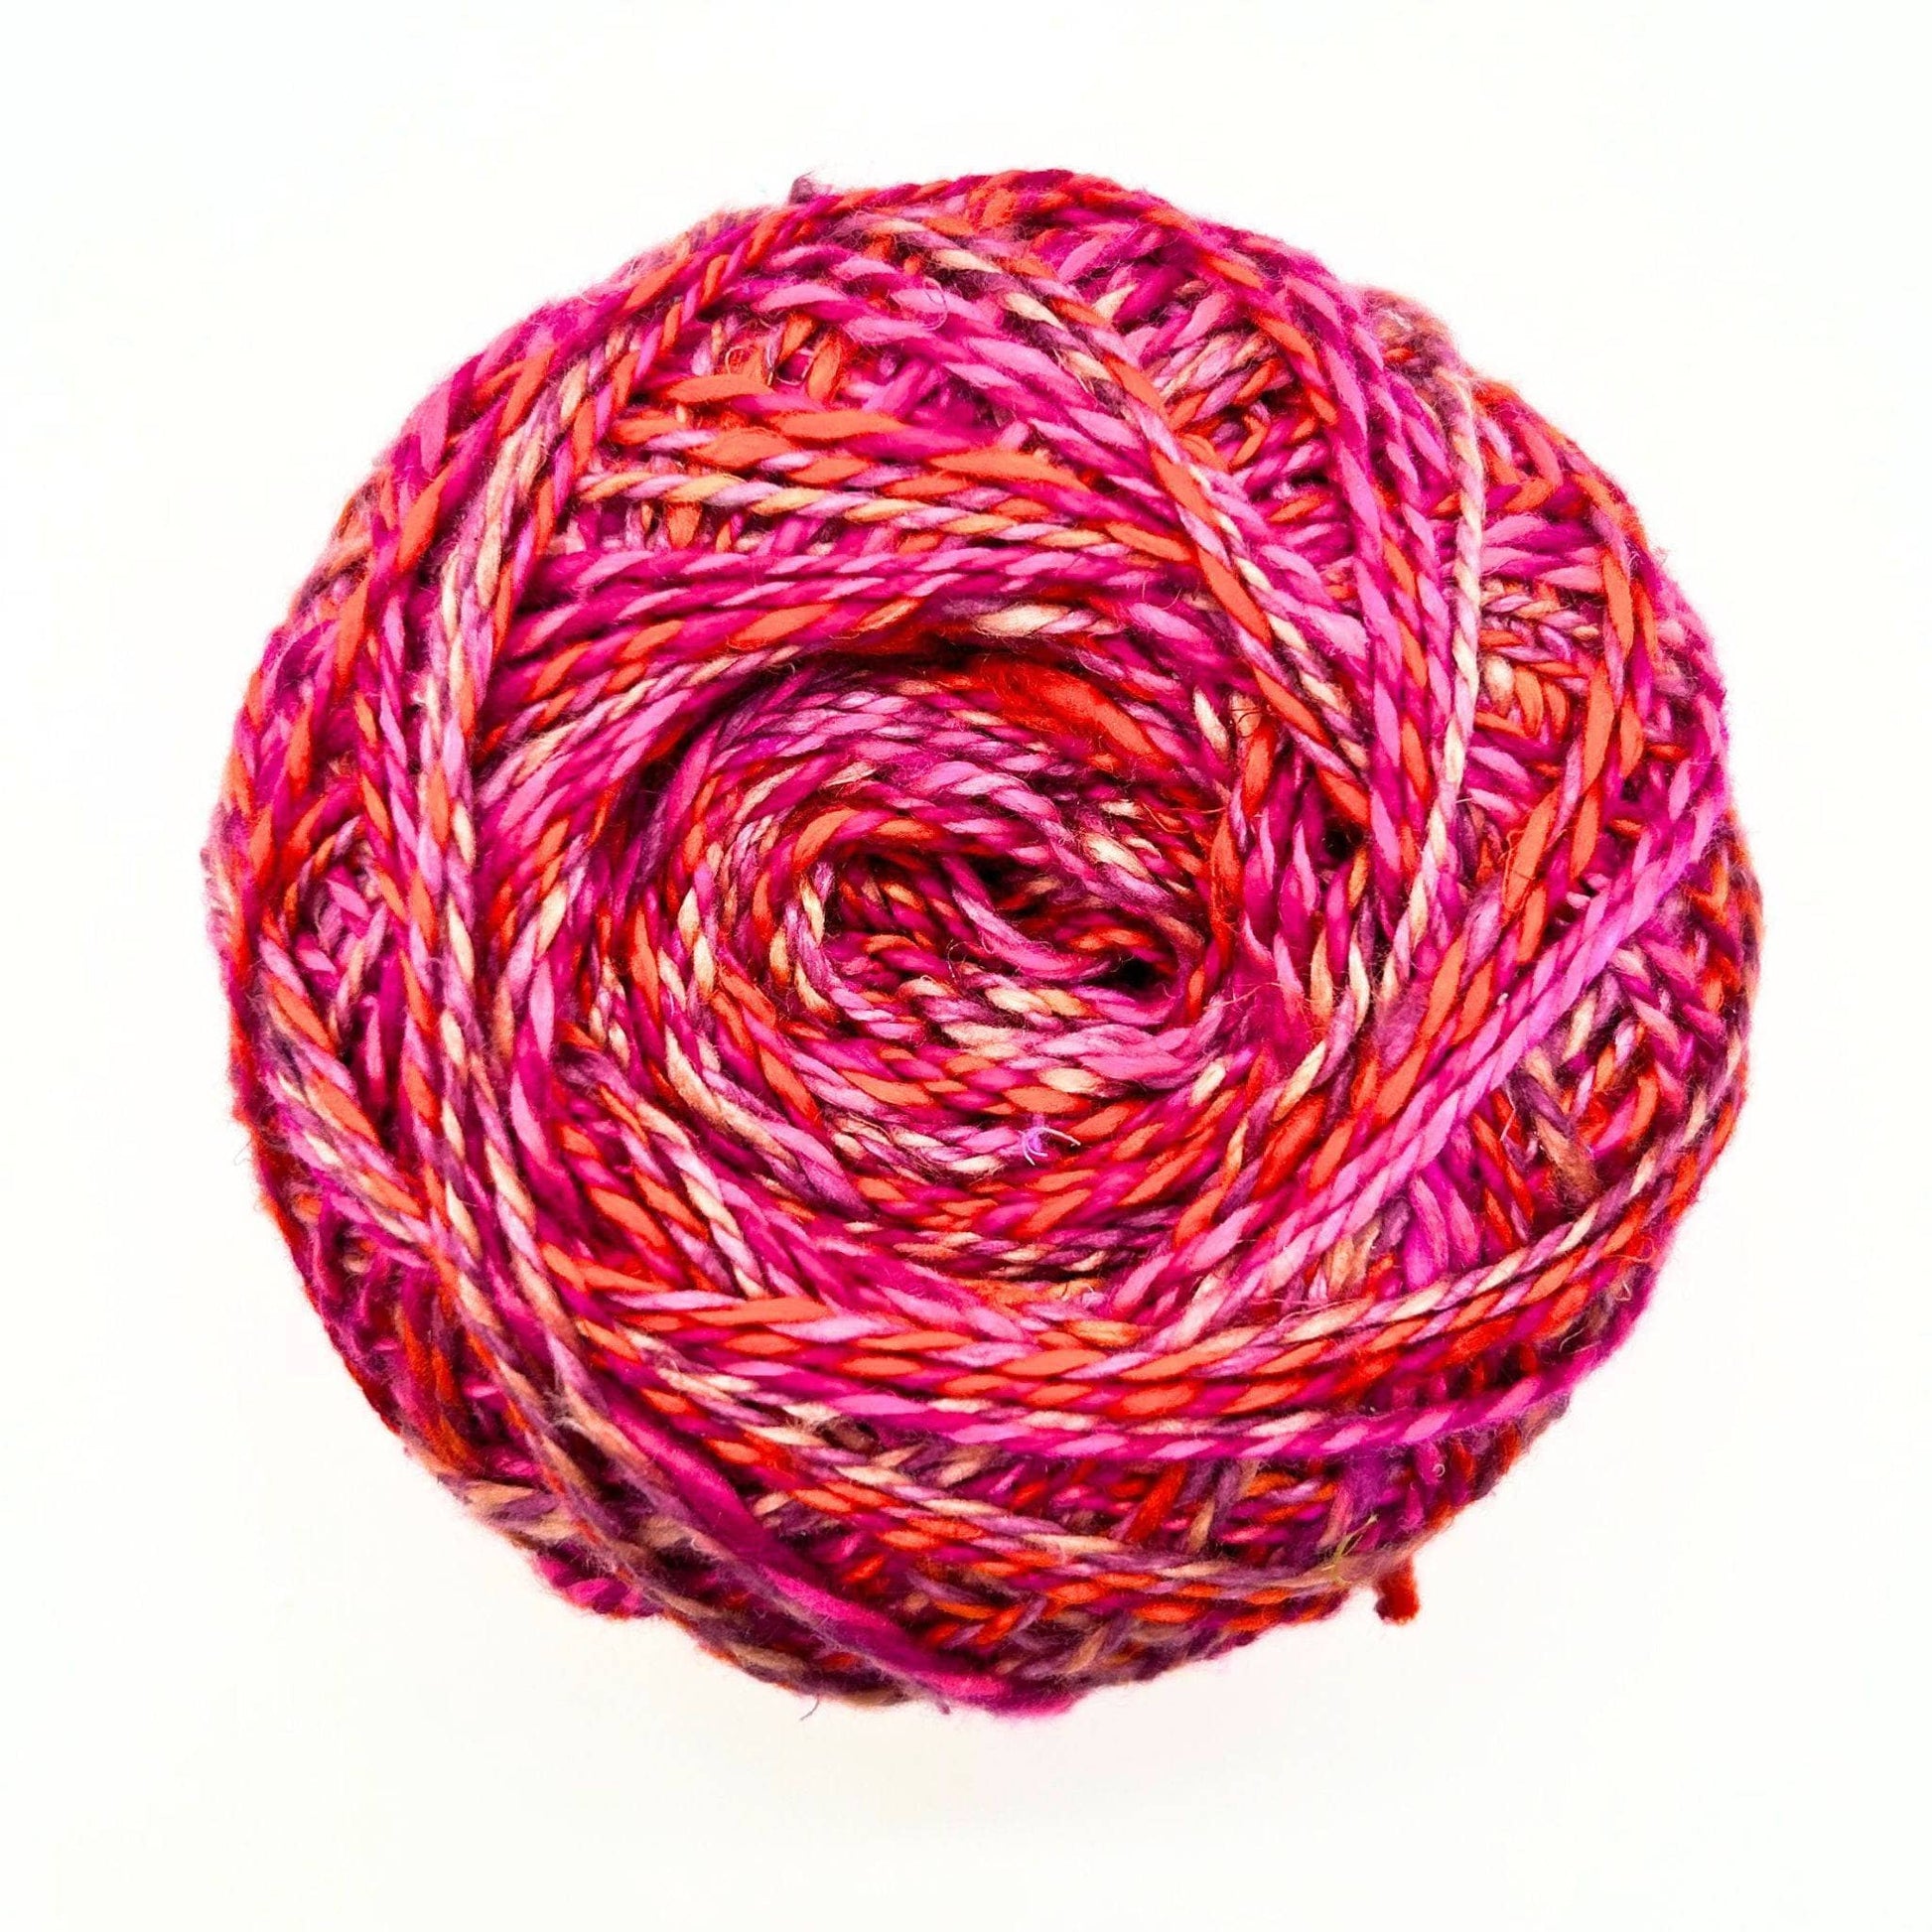 one skein of journey recycled silk yarn in the Field of Poppies colorway (variegated pink, orange, red) in front of a white background.